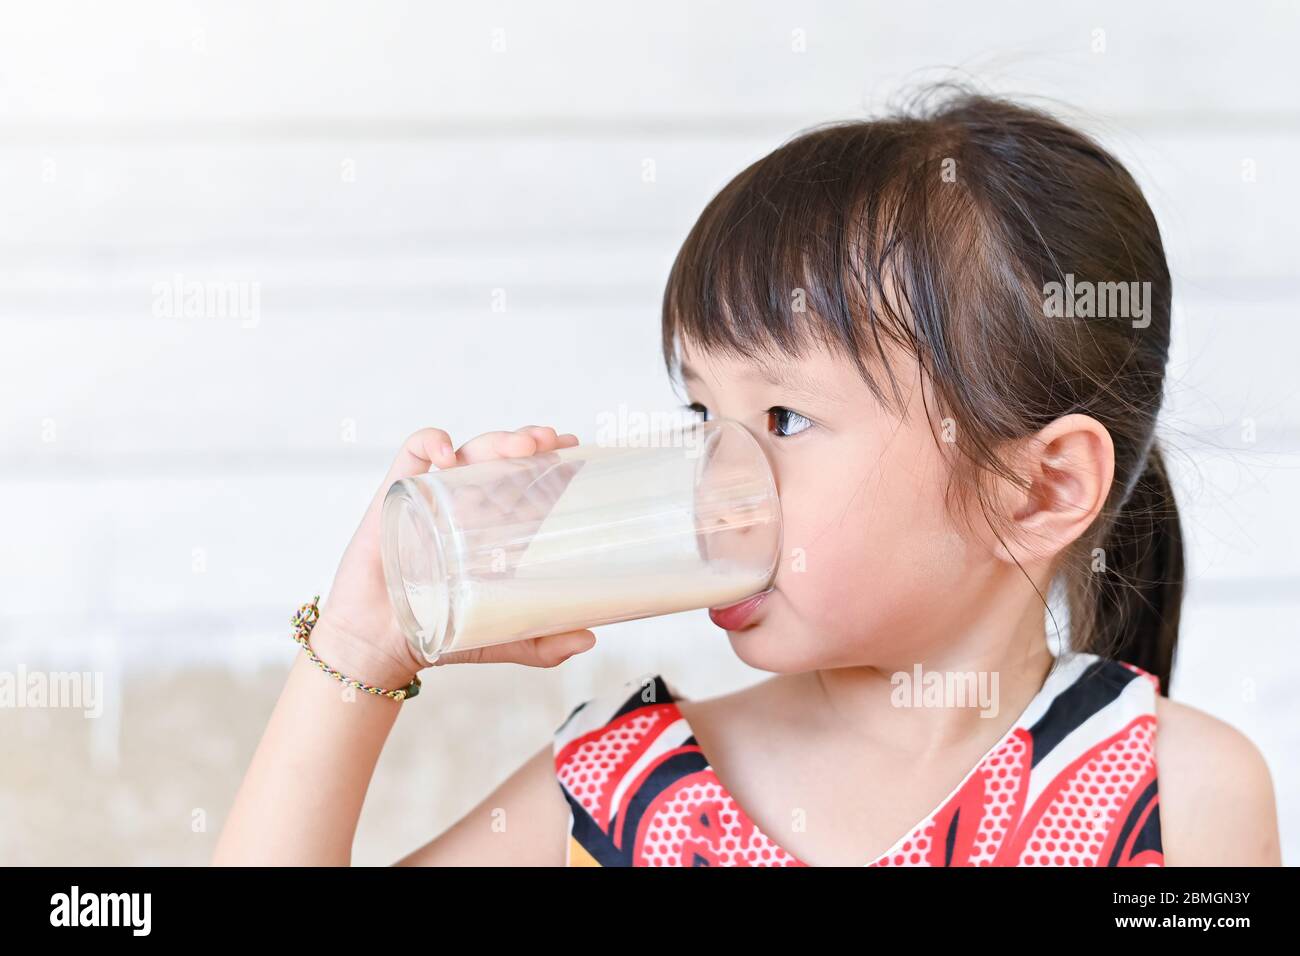 Portrait of a Cute Toddler Drinking Milk from the Bottle, One Year Old Food  Concept Stock Image - Image of home, milk: 144620017